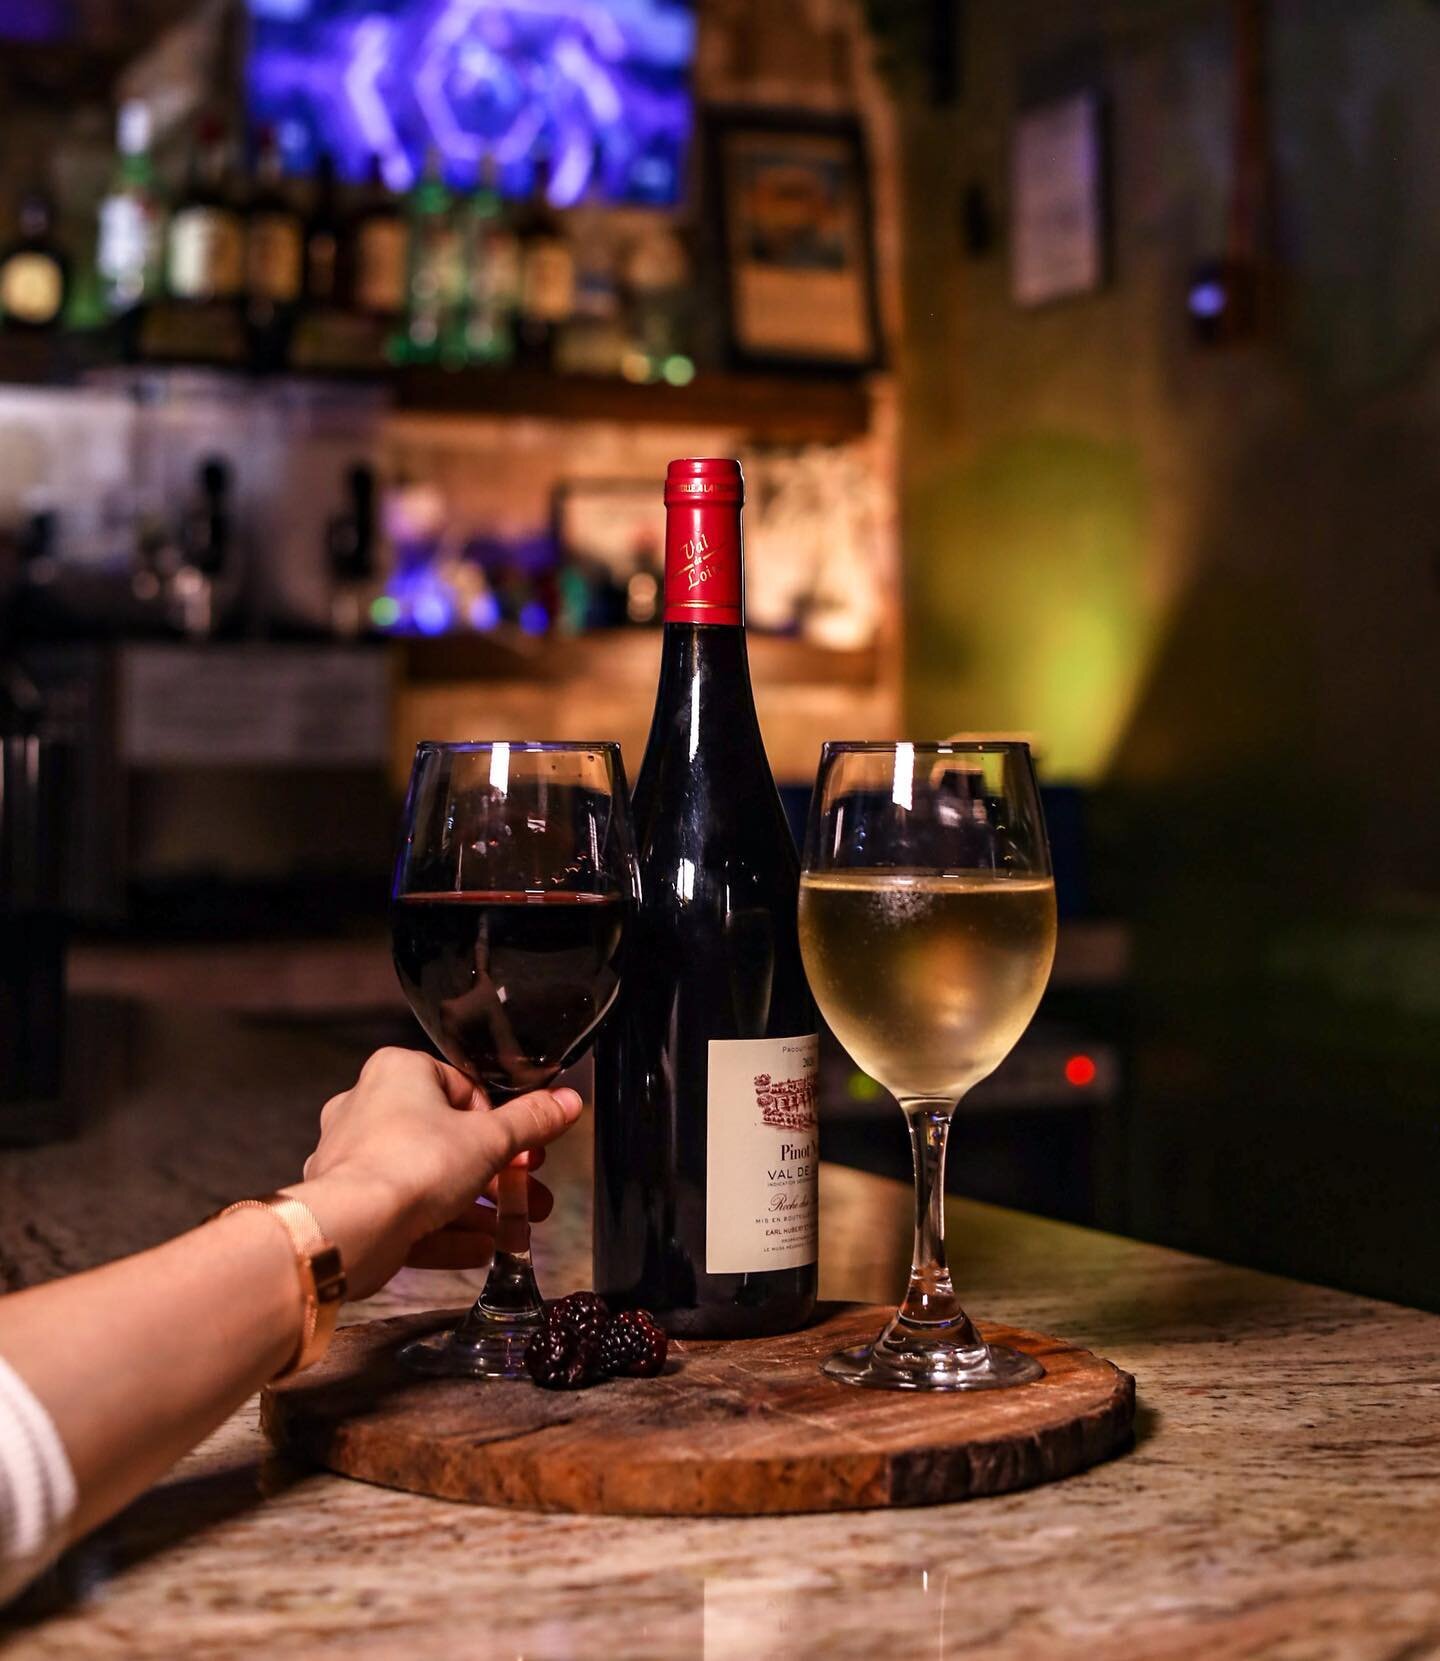 Raise a glass! Cheers to a night of endless wine 🍷🔝

Enjoy our all you can drink wine for $15!!!

Book your table now 🗓  Visit our website or call us (305) 505-8449

🍸www.baccanomiami.com (link in bio) 
📍169 NW 23rd St, Miami, FL.

#wynwoodresta